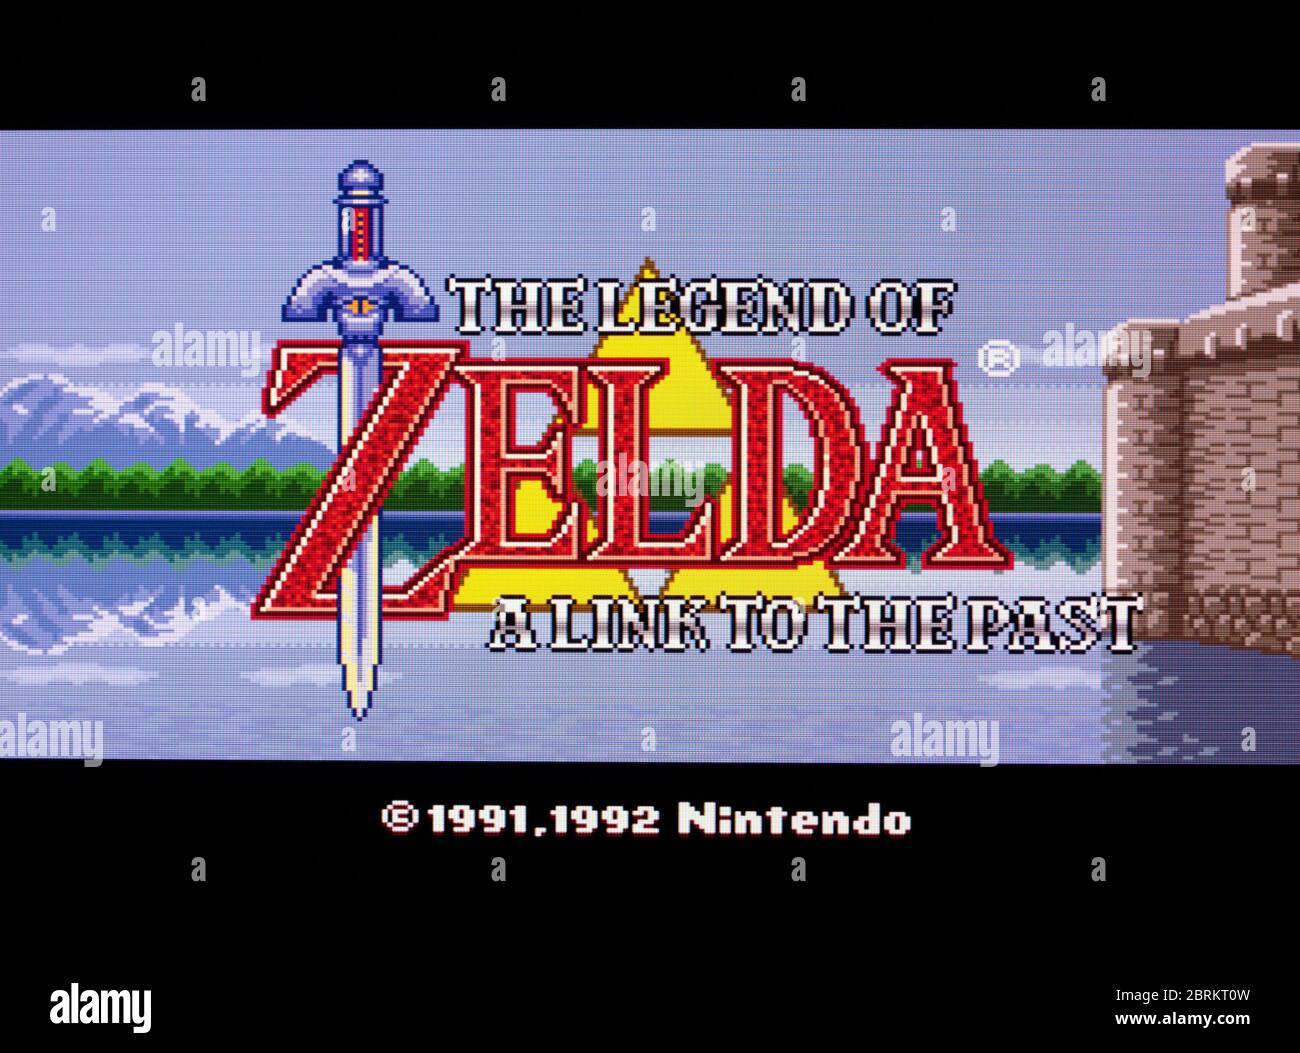 The Legend of Zelda A Link To The Past - SNES Super Nintendo - Editorial  use only Stock Photo - Alamy